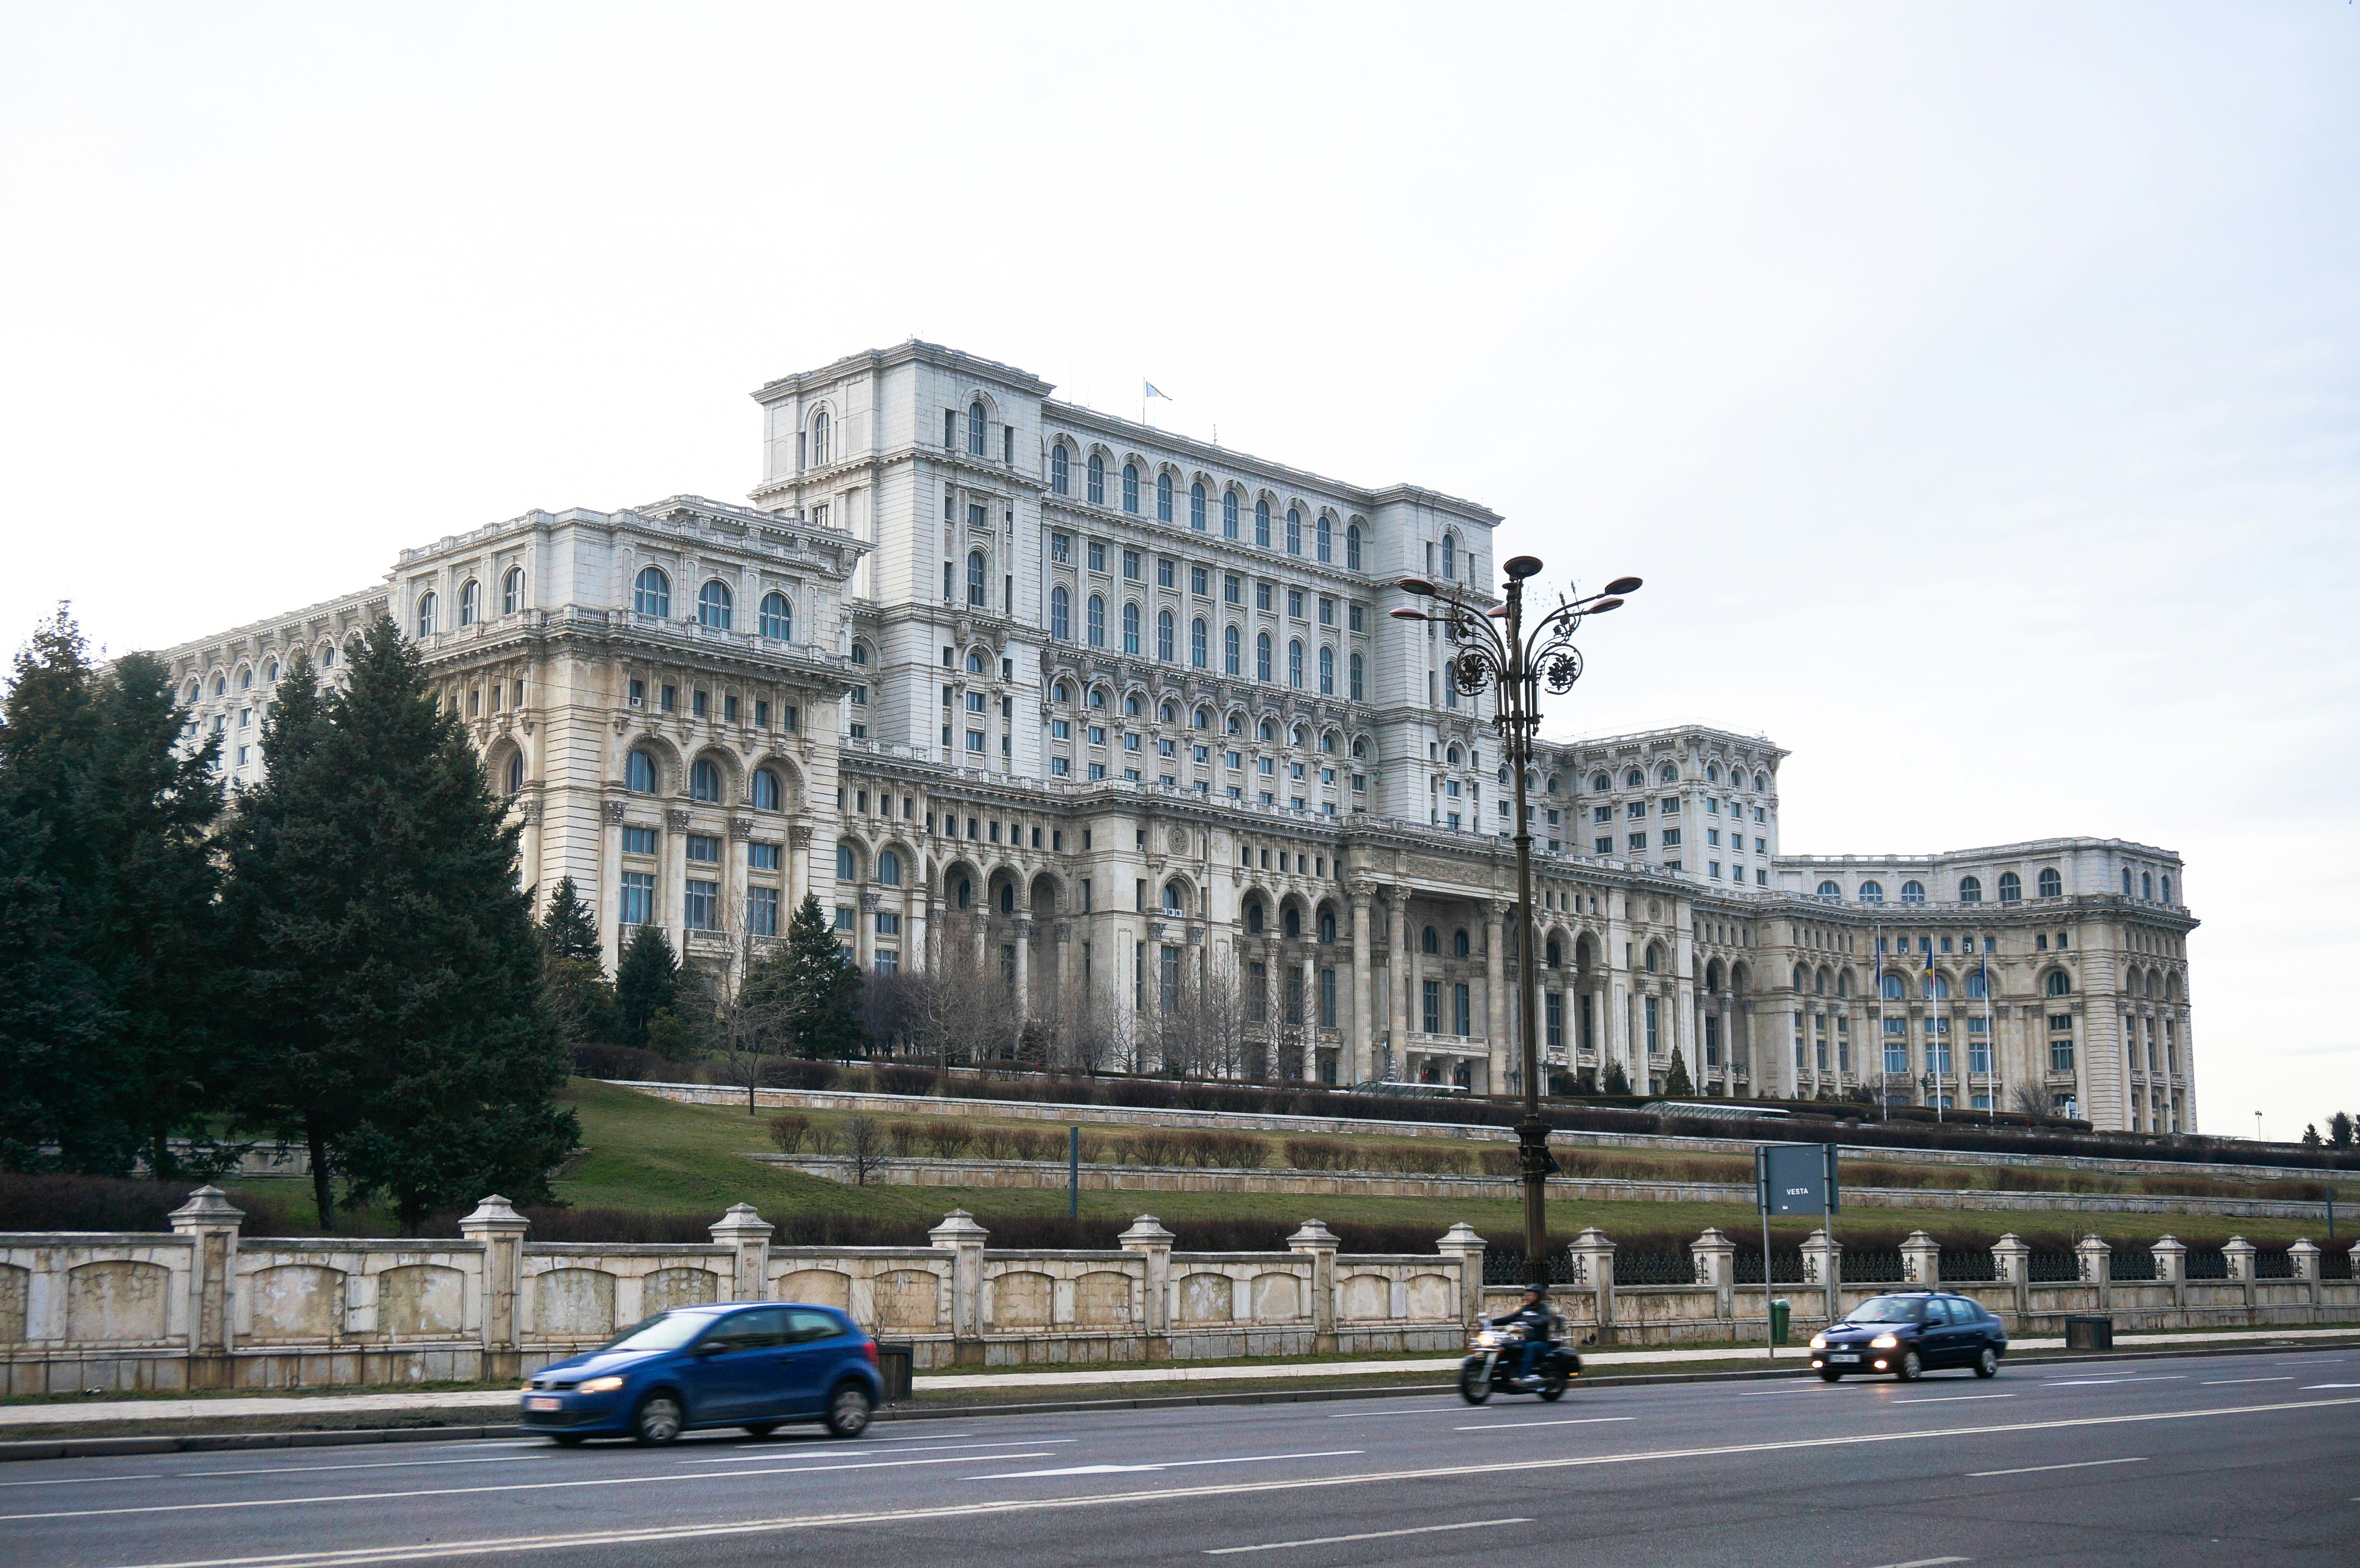 A side view of Bucharest's Palace of Parliament, a large tiered white stone building with hundreds of arched windows